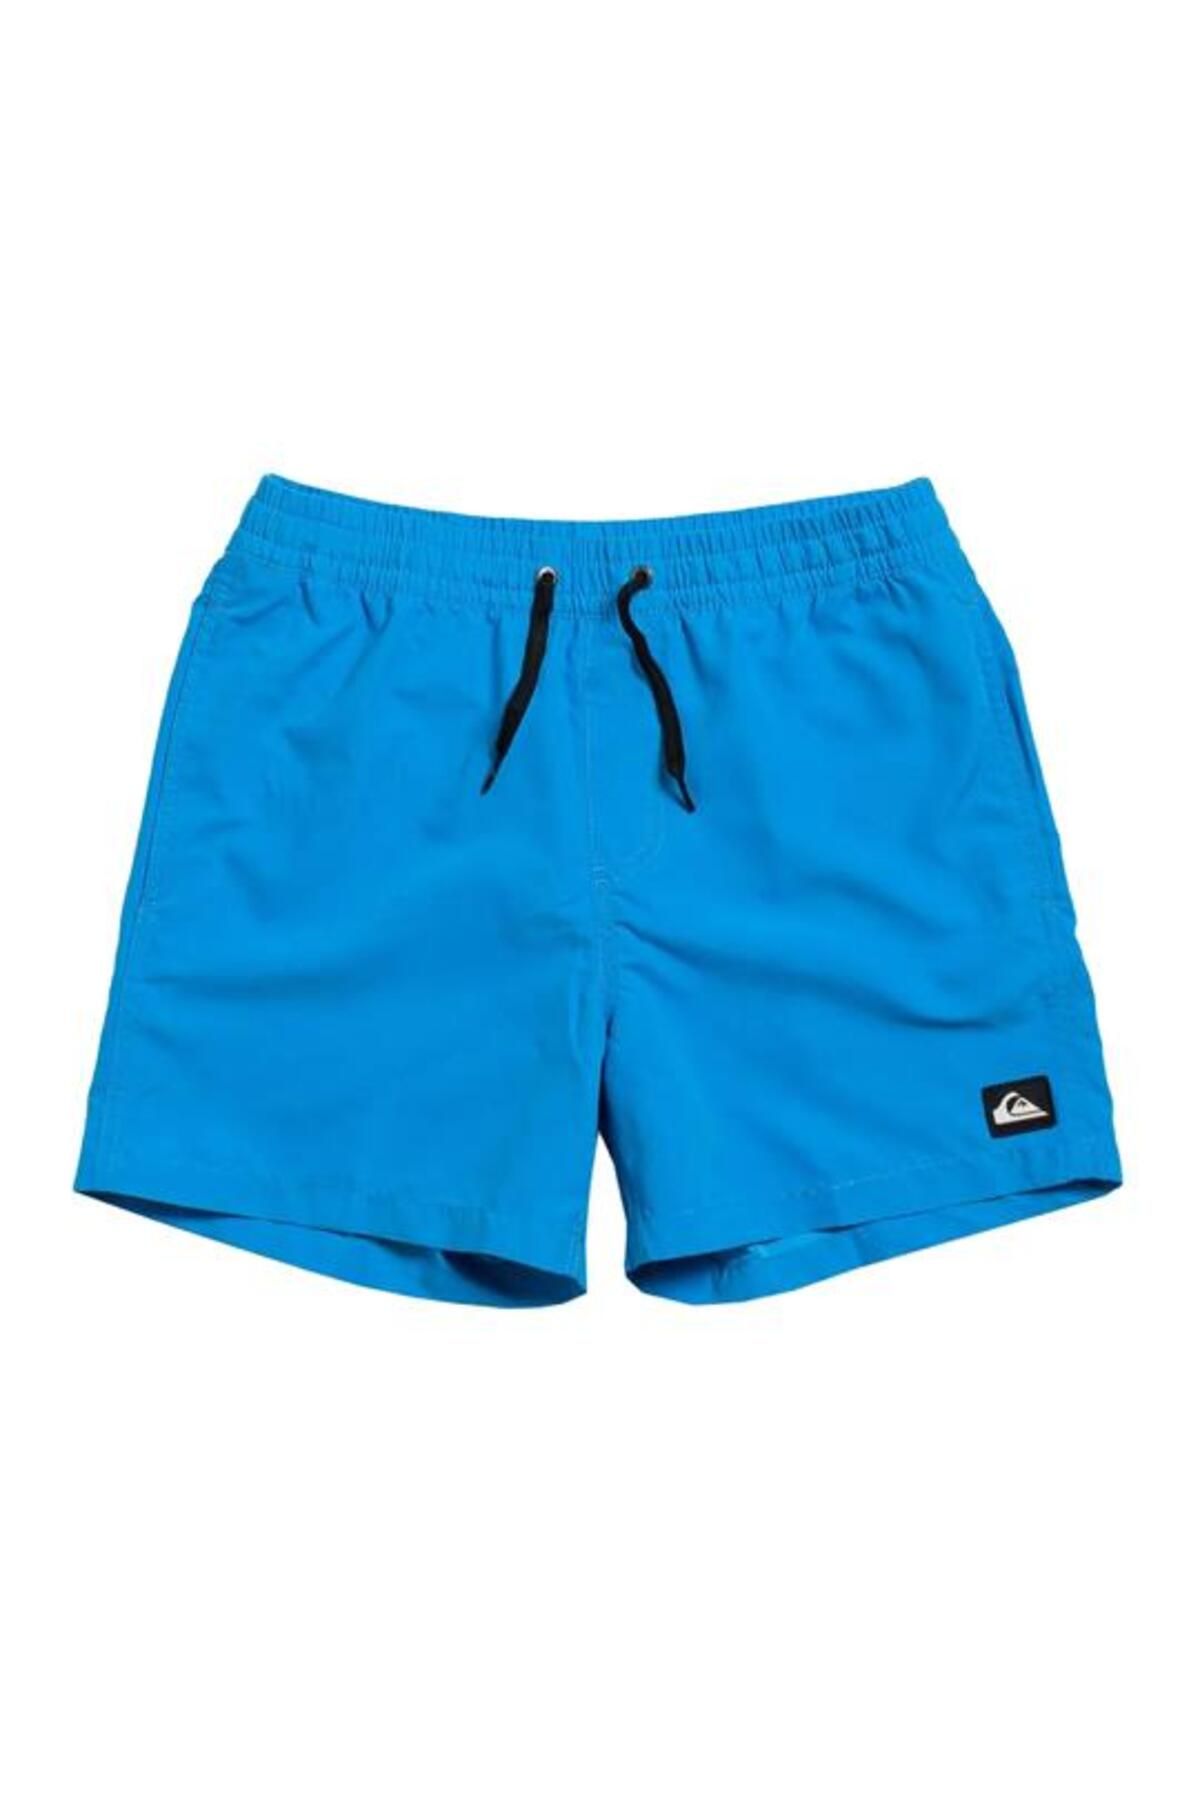 Quiksilver EVERYDAY VOLLEY YOUTH 13 ÇOCUK ŞORT BLITHE-BMM0